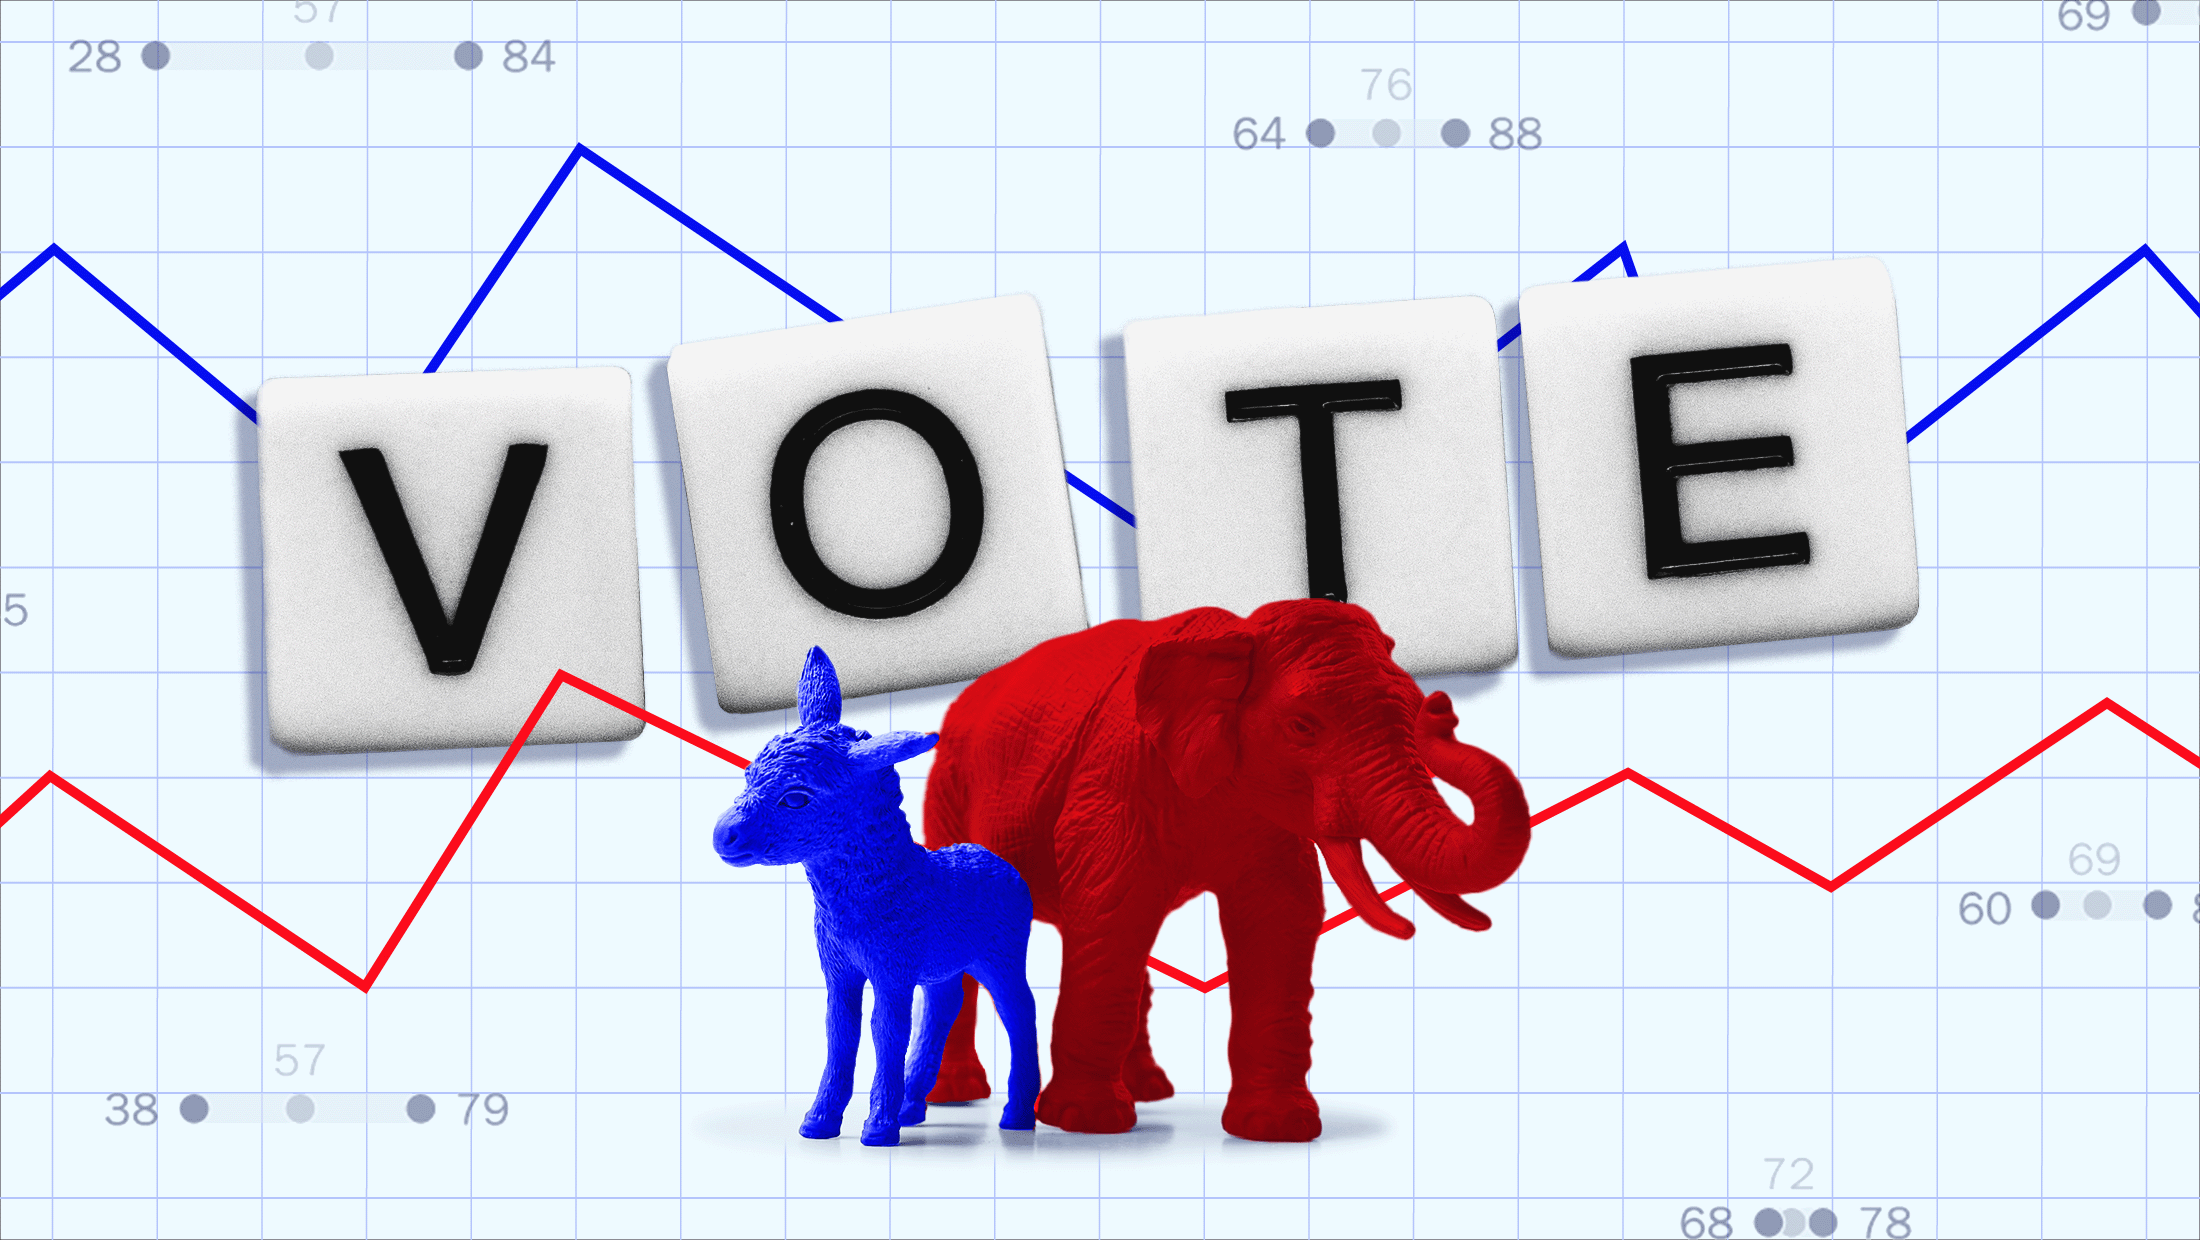 A blue graph paper background with a red trend line and a blue trend line. A blue donkey and red elephant along with four game tiles reading "VOTE" are in front of the background.